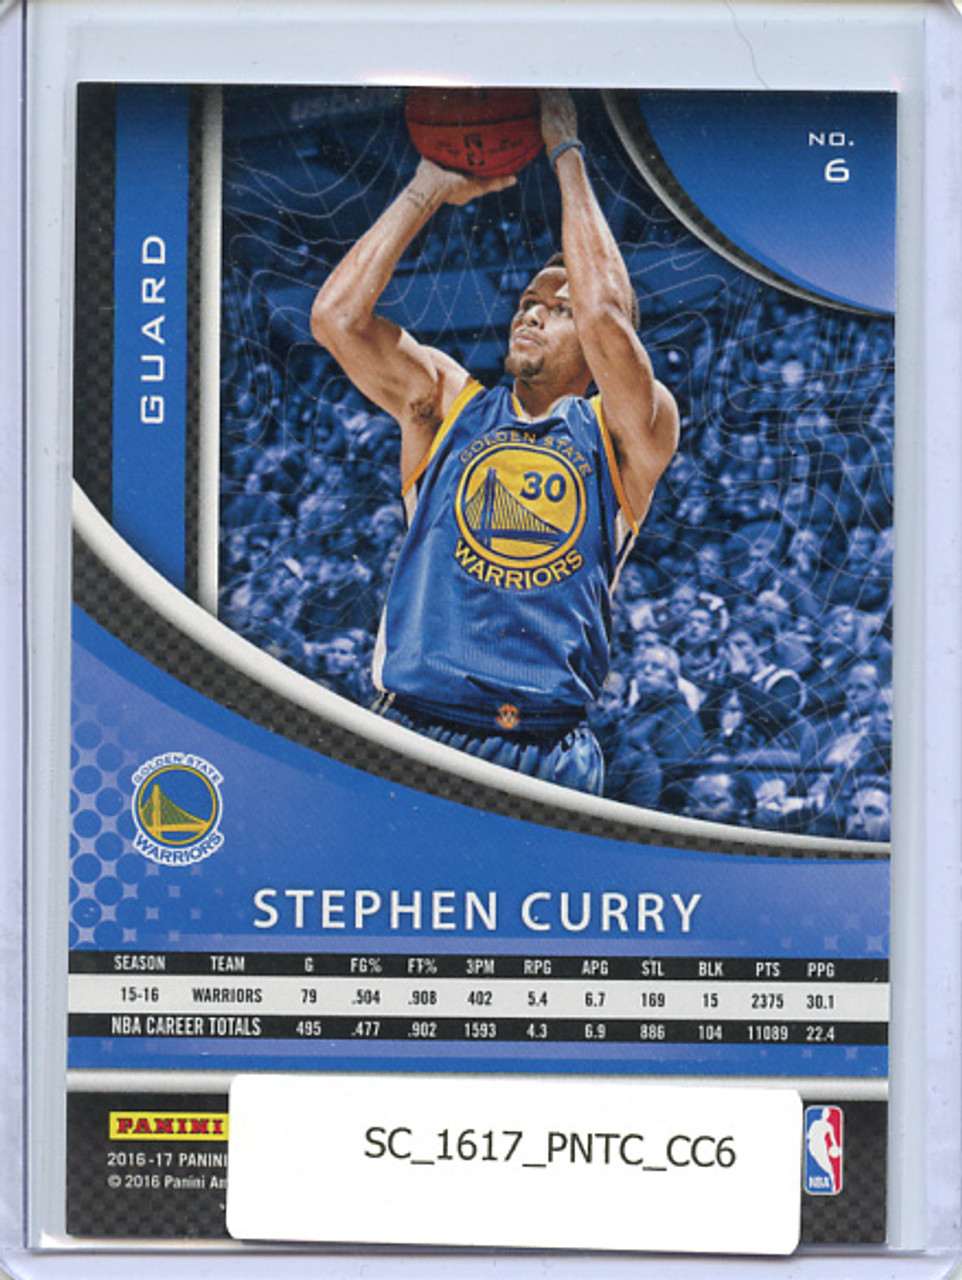 Stephen Curry 2016-17 Totally Certified, Calling Cards #6